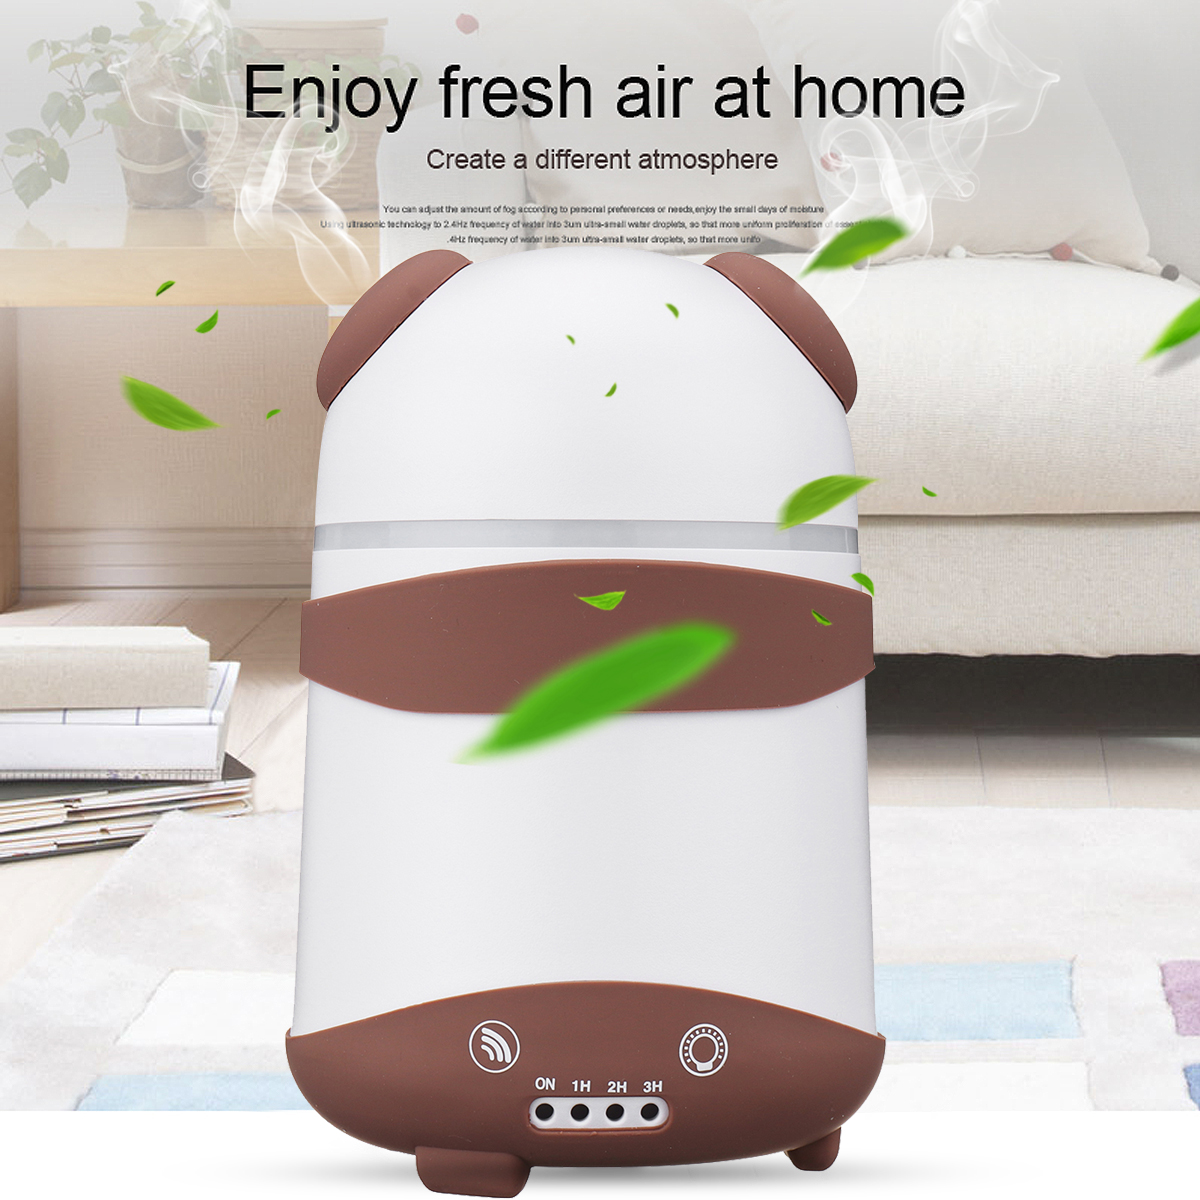 Dual-Humidifier-Air-Oil-Diffuser-Aroma-Mist-Maker-LED-Cartoon-Panda-Style-For-Home-Office-US-Plug-1376138-3